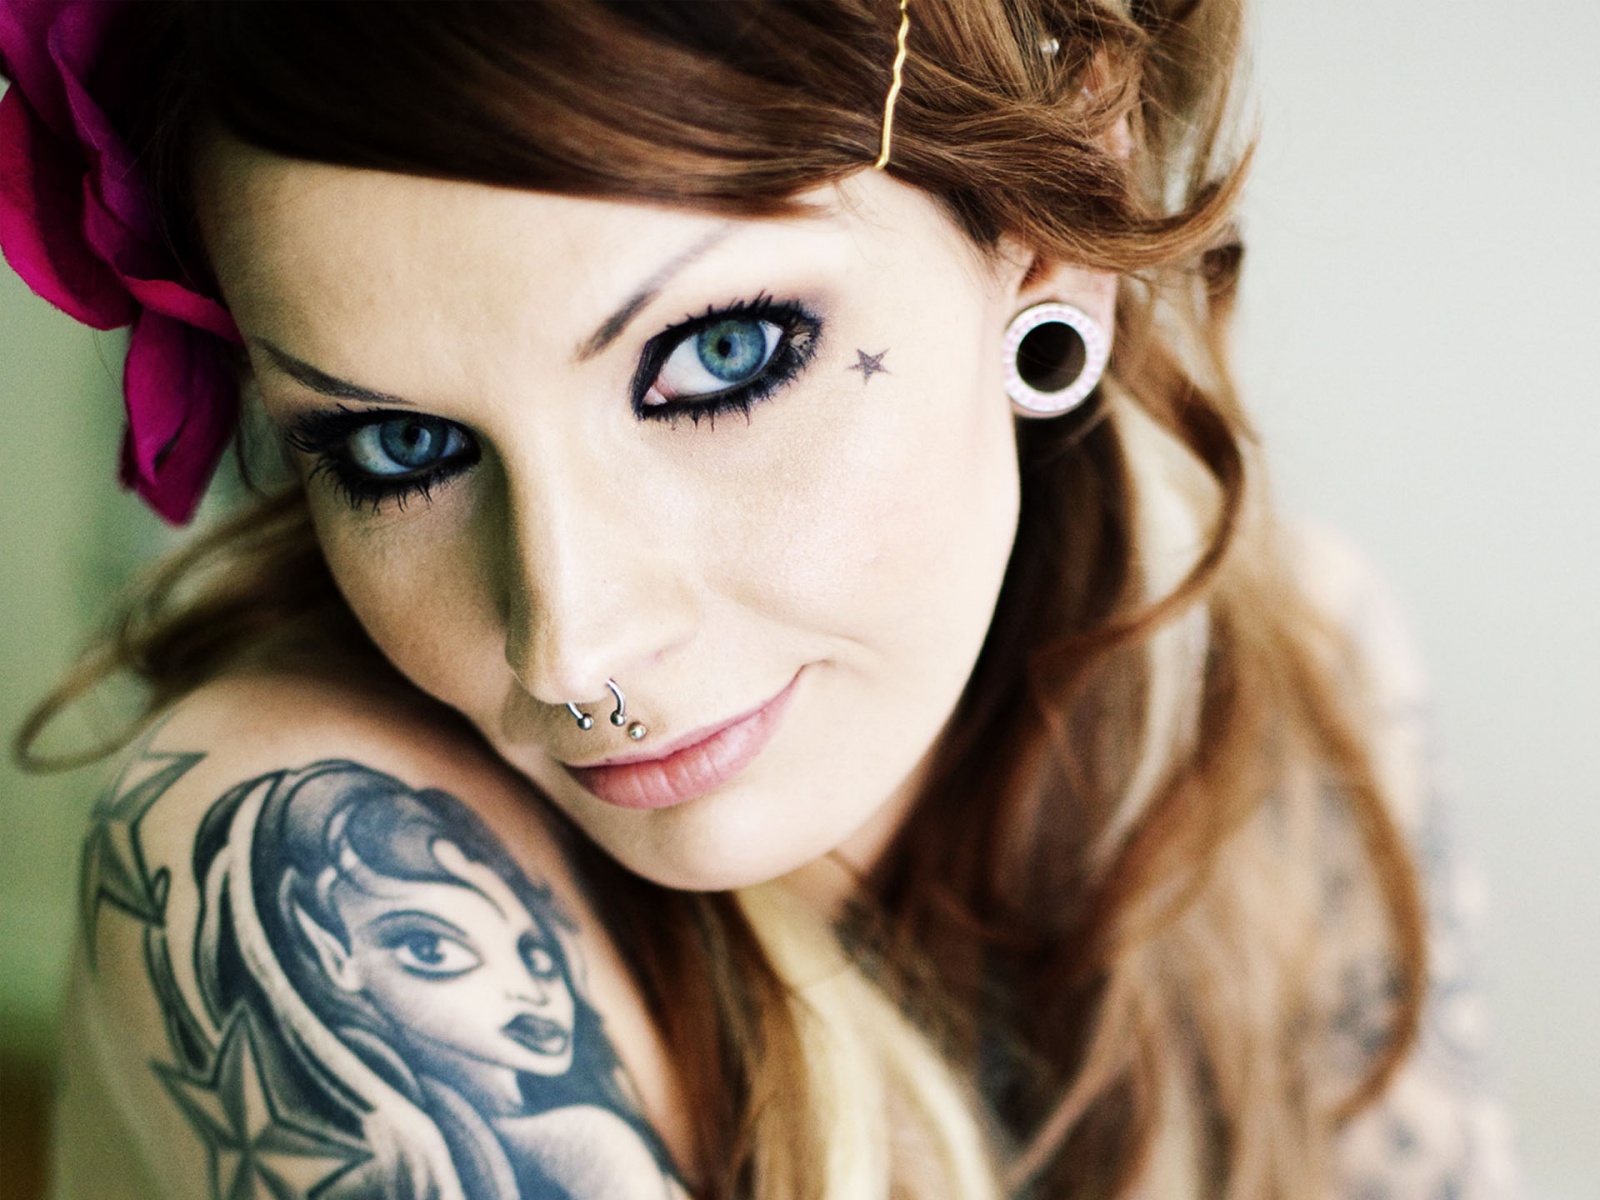 Girls Girl with tattoos